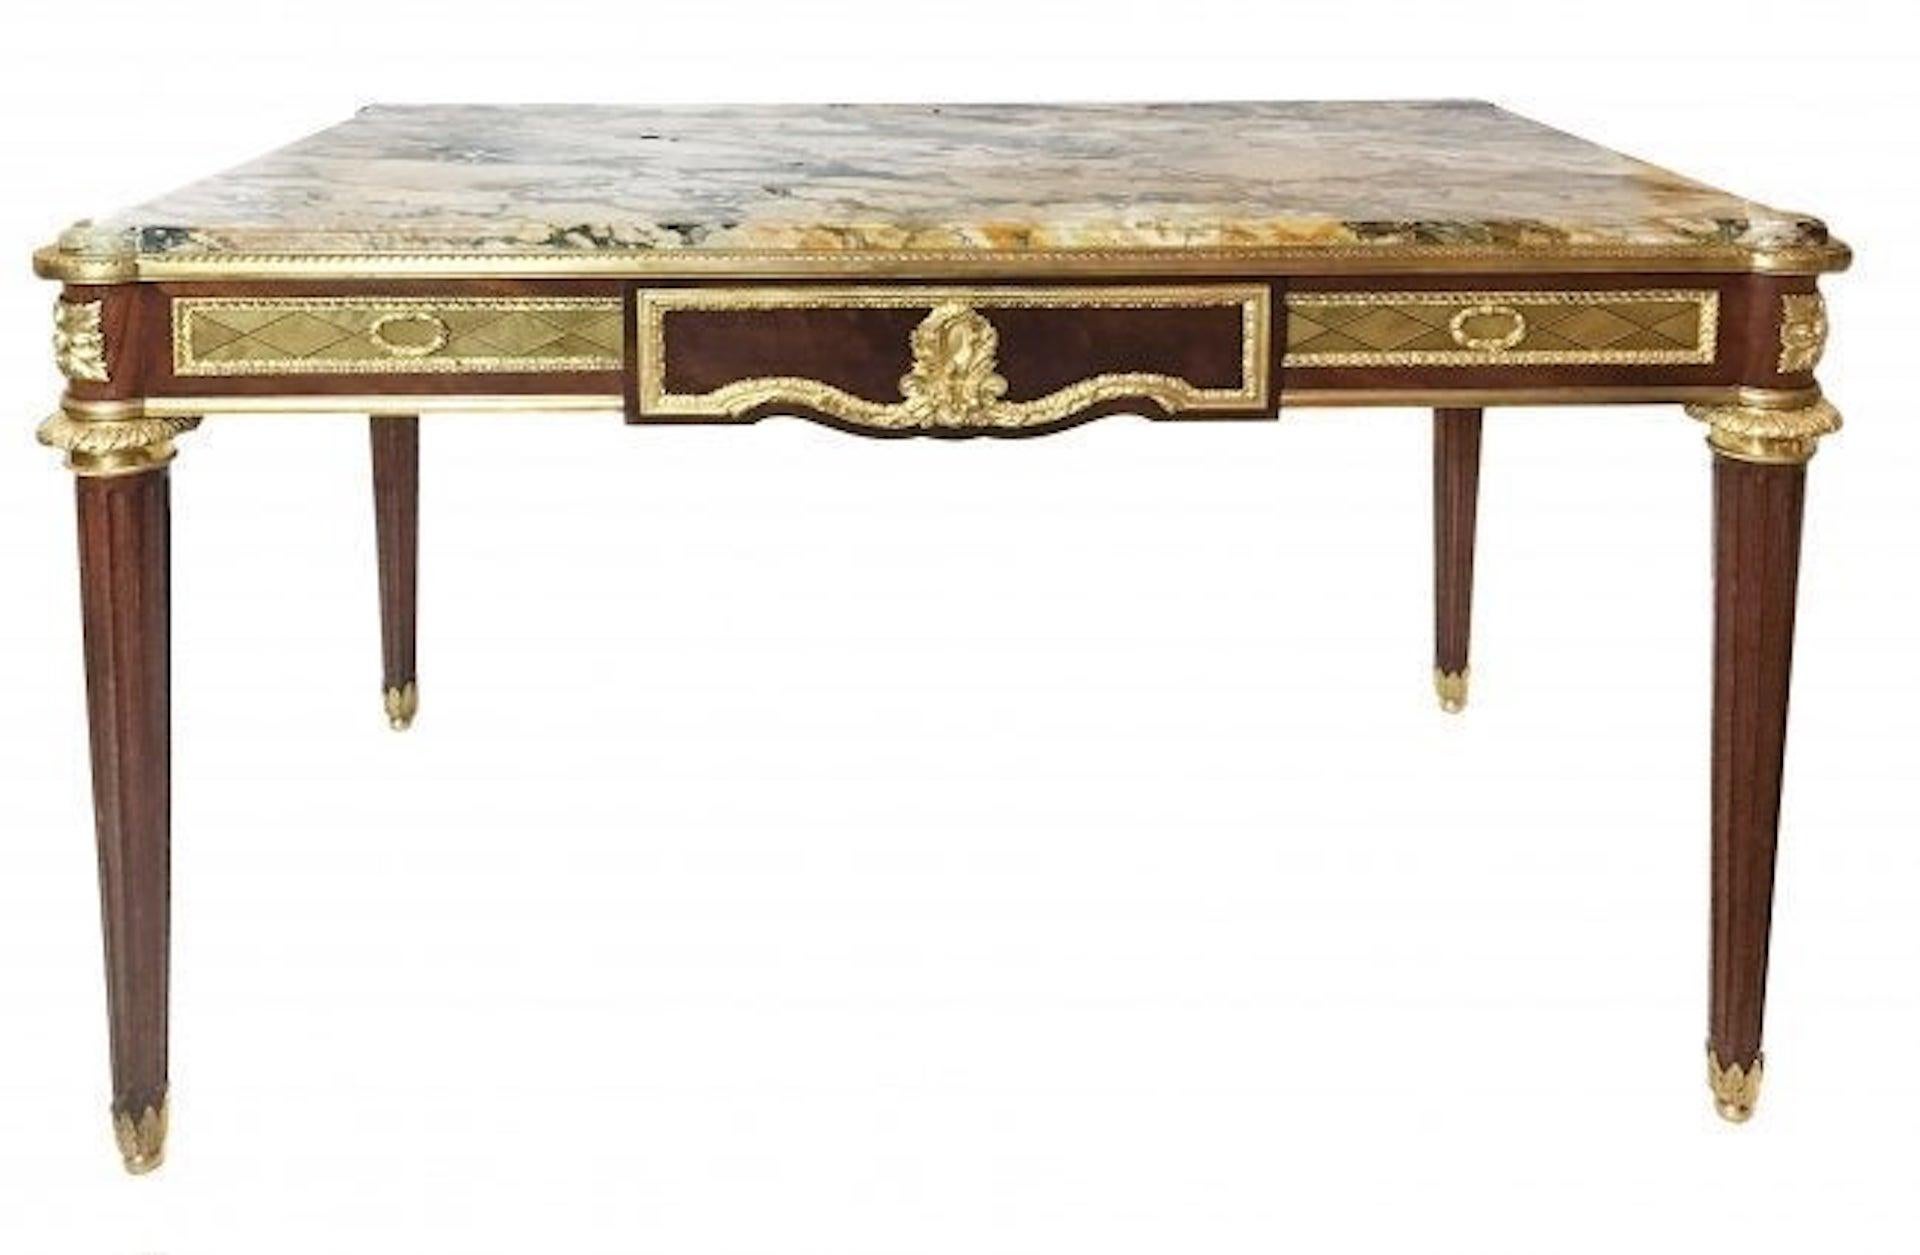 Louix XVI Style Gilt-Bronze Mounted Mahogany Center Table, Paris, circa 1890 In Good Condition For Sale In West Palm Beach, FL